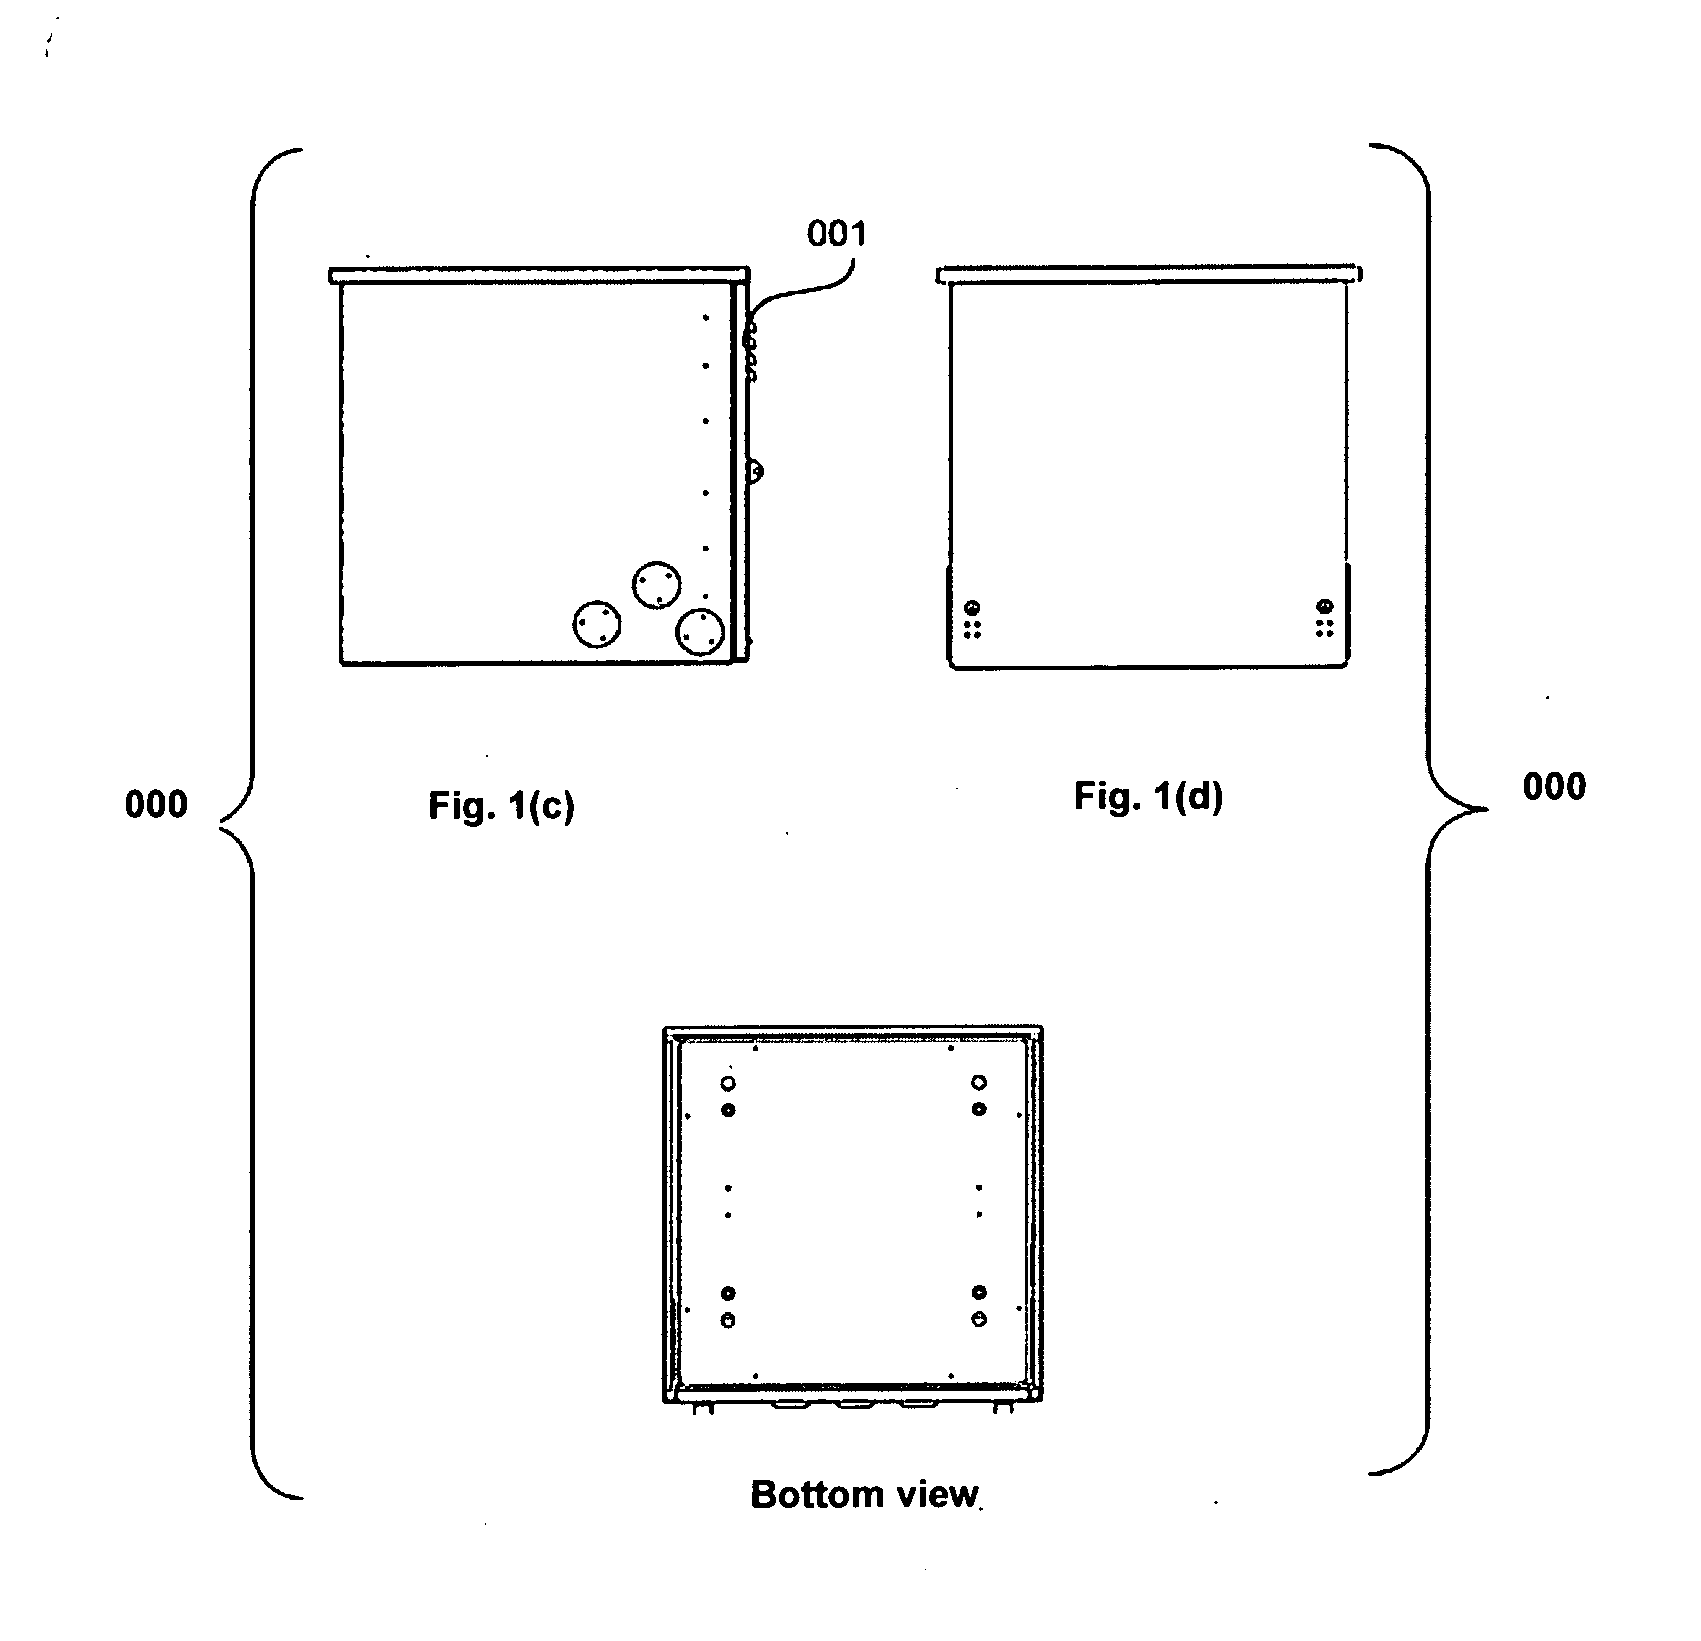 Electronic device and battery enclosure